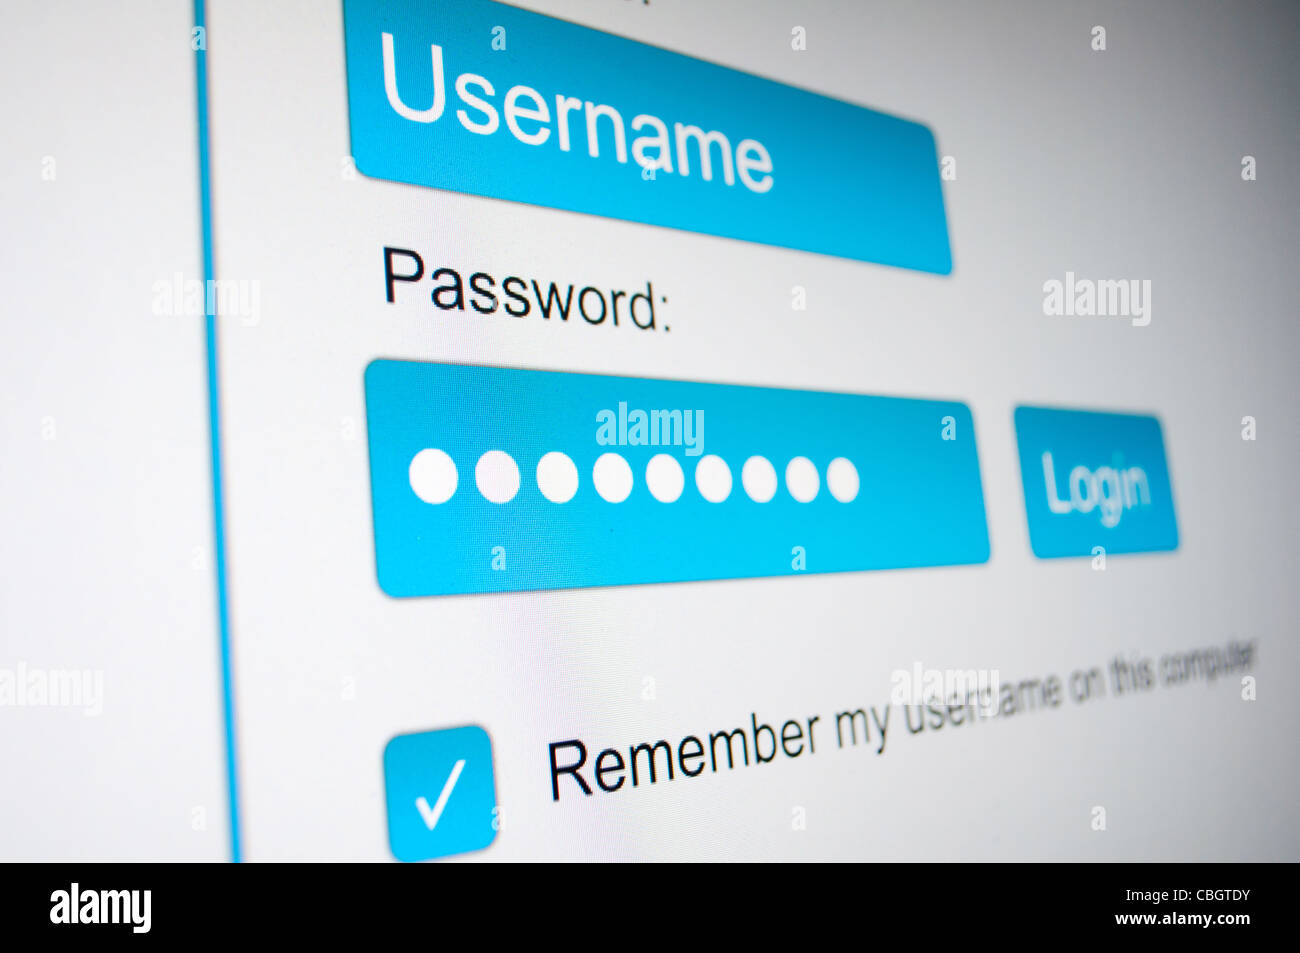 login-box-username-and-password-in-inter